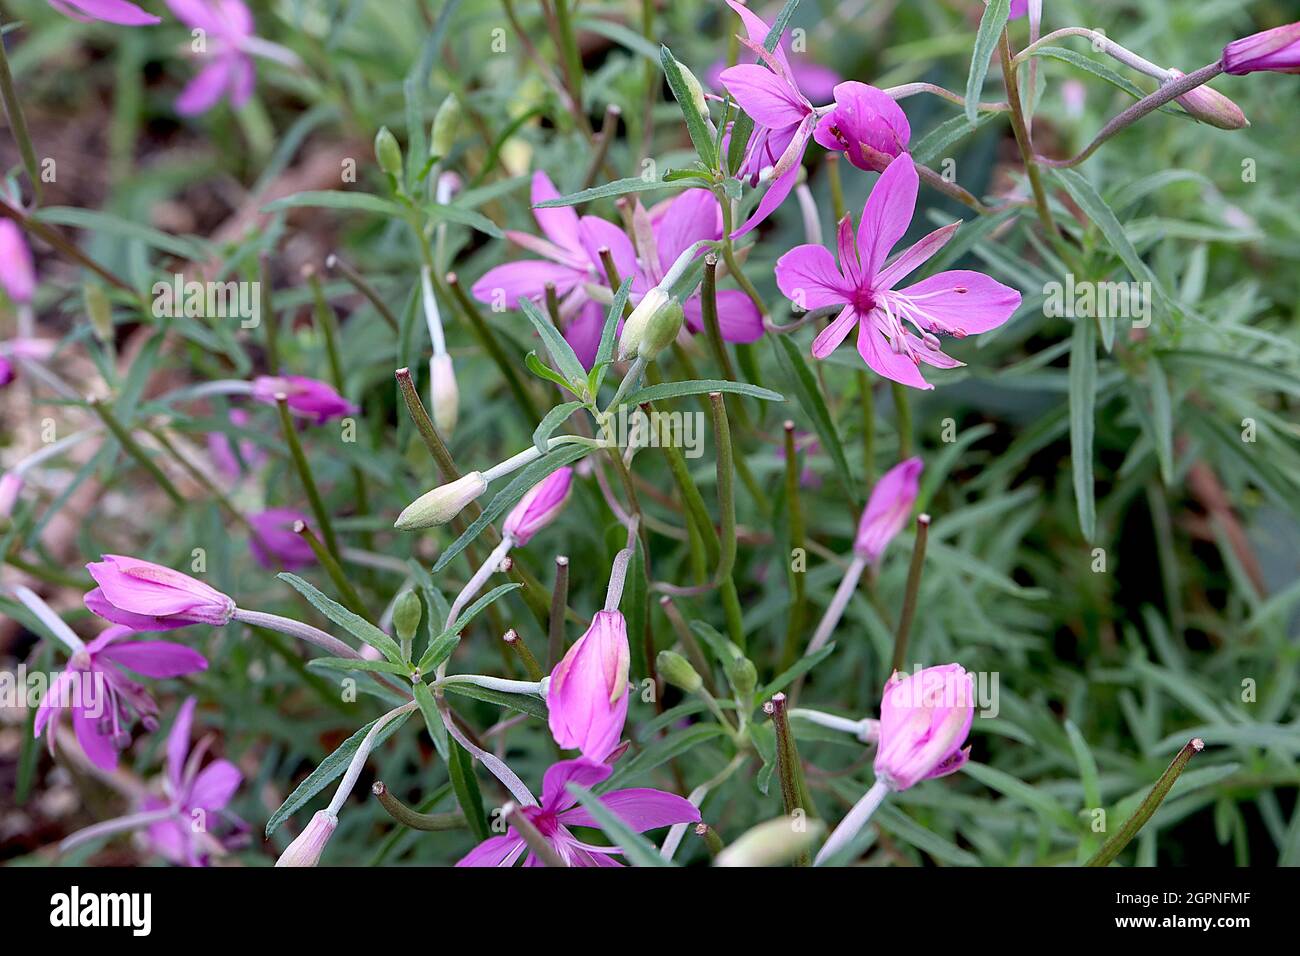 Epilobium / Chamaenerion dodonaei  Dodoen’s willowherb - deep pink flowers with wide petals and slender sepals, small narrow leaves,  September, UK Stock Photo